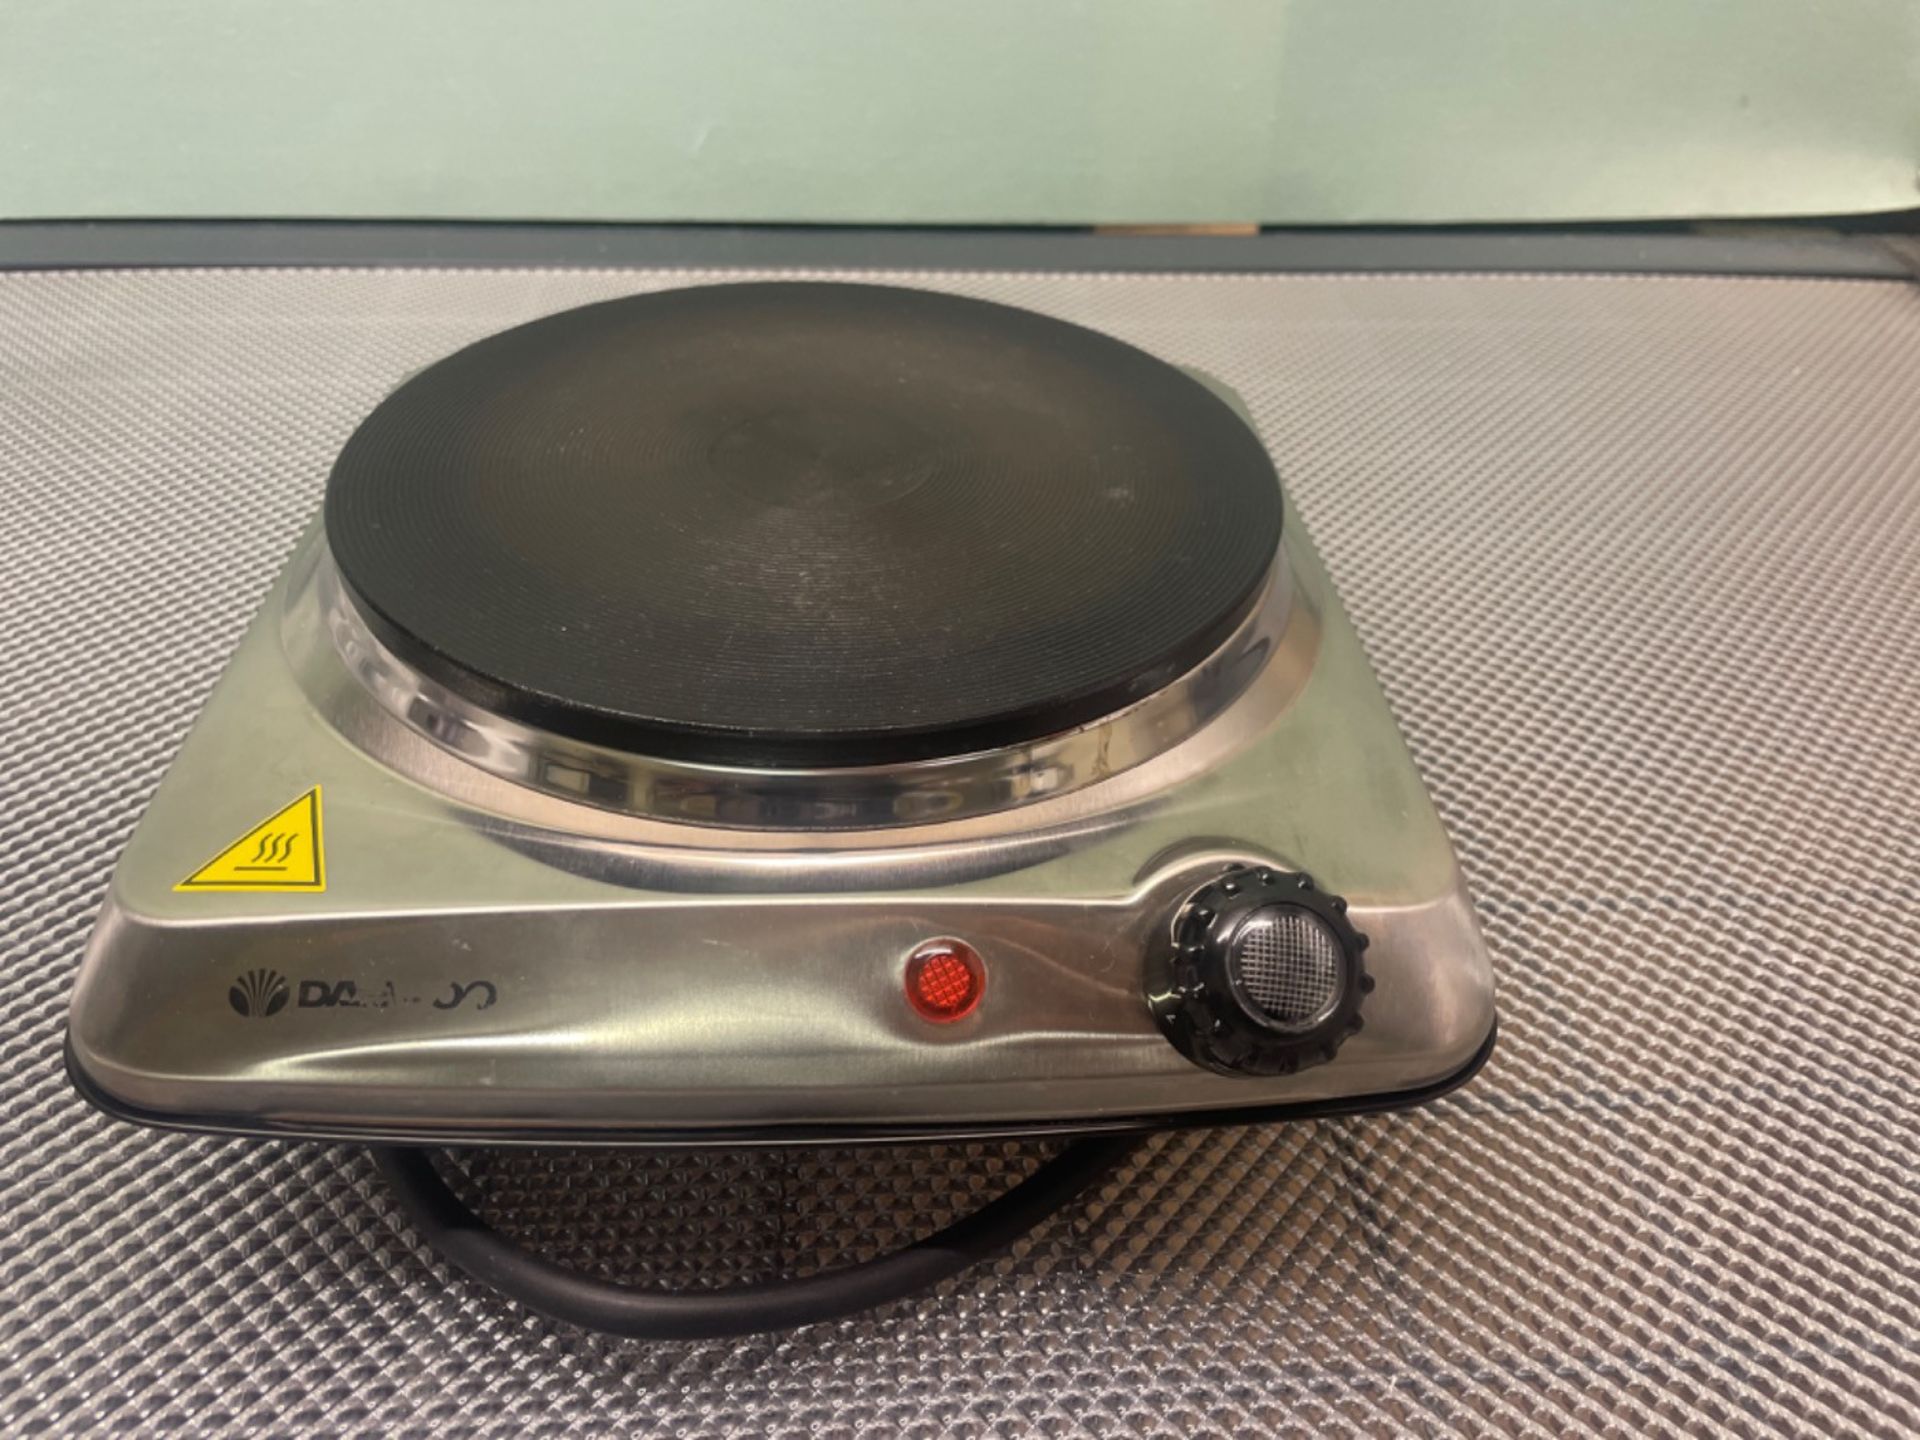 Daewoo SDA1731 Single Hot Plate-Portable & Compact-Cast Iron Heating Element-On/Off Indicator Light - Image 3 of 3